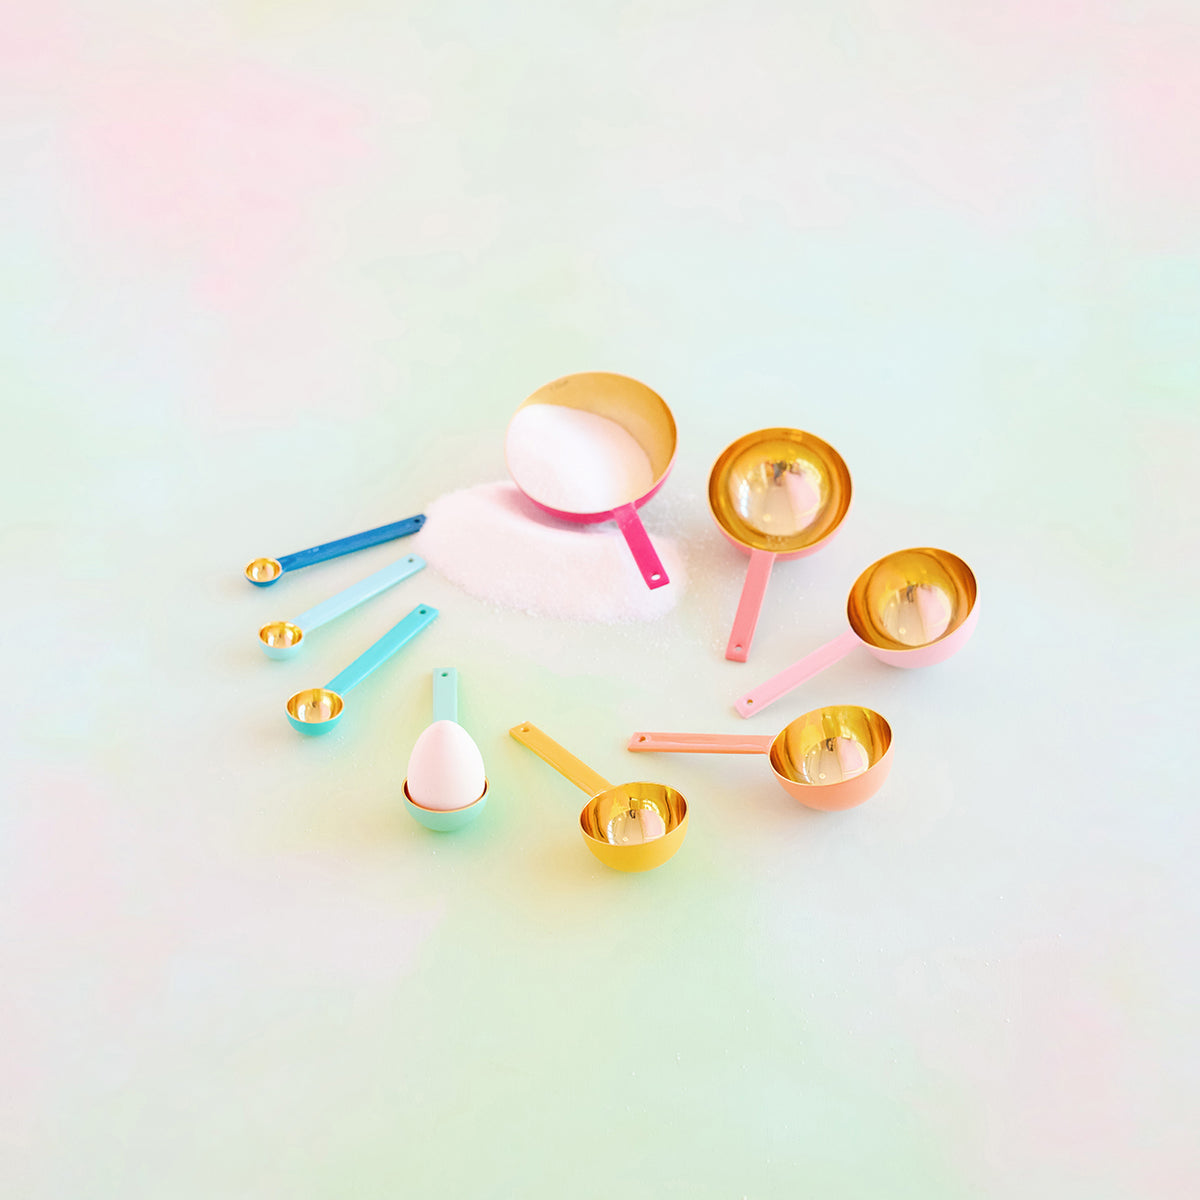 https://www.glitterville.shop/wp-content/uploads/1700/19/rainbow-measuring-spoons-set-of-9-glitterville-studios-sale-online-com-provides-top-quality-products-with-affordable-prices_0.jpg